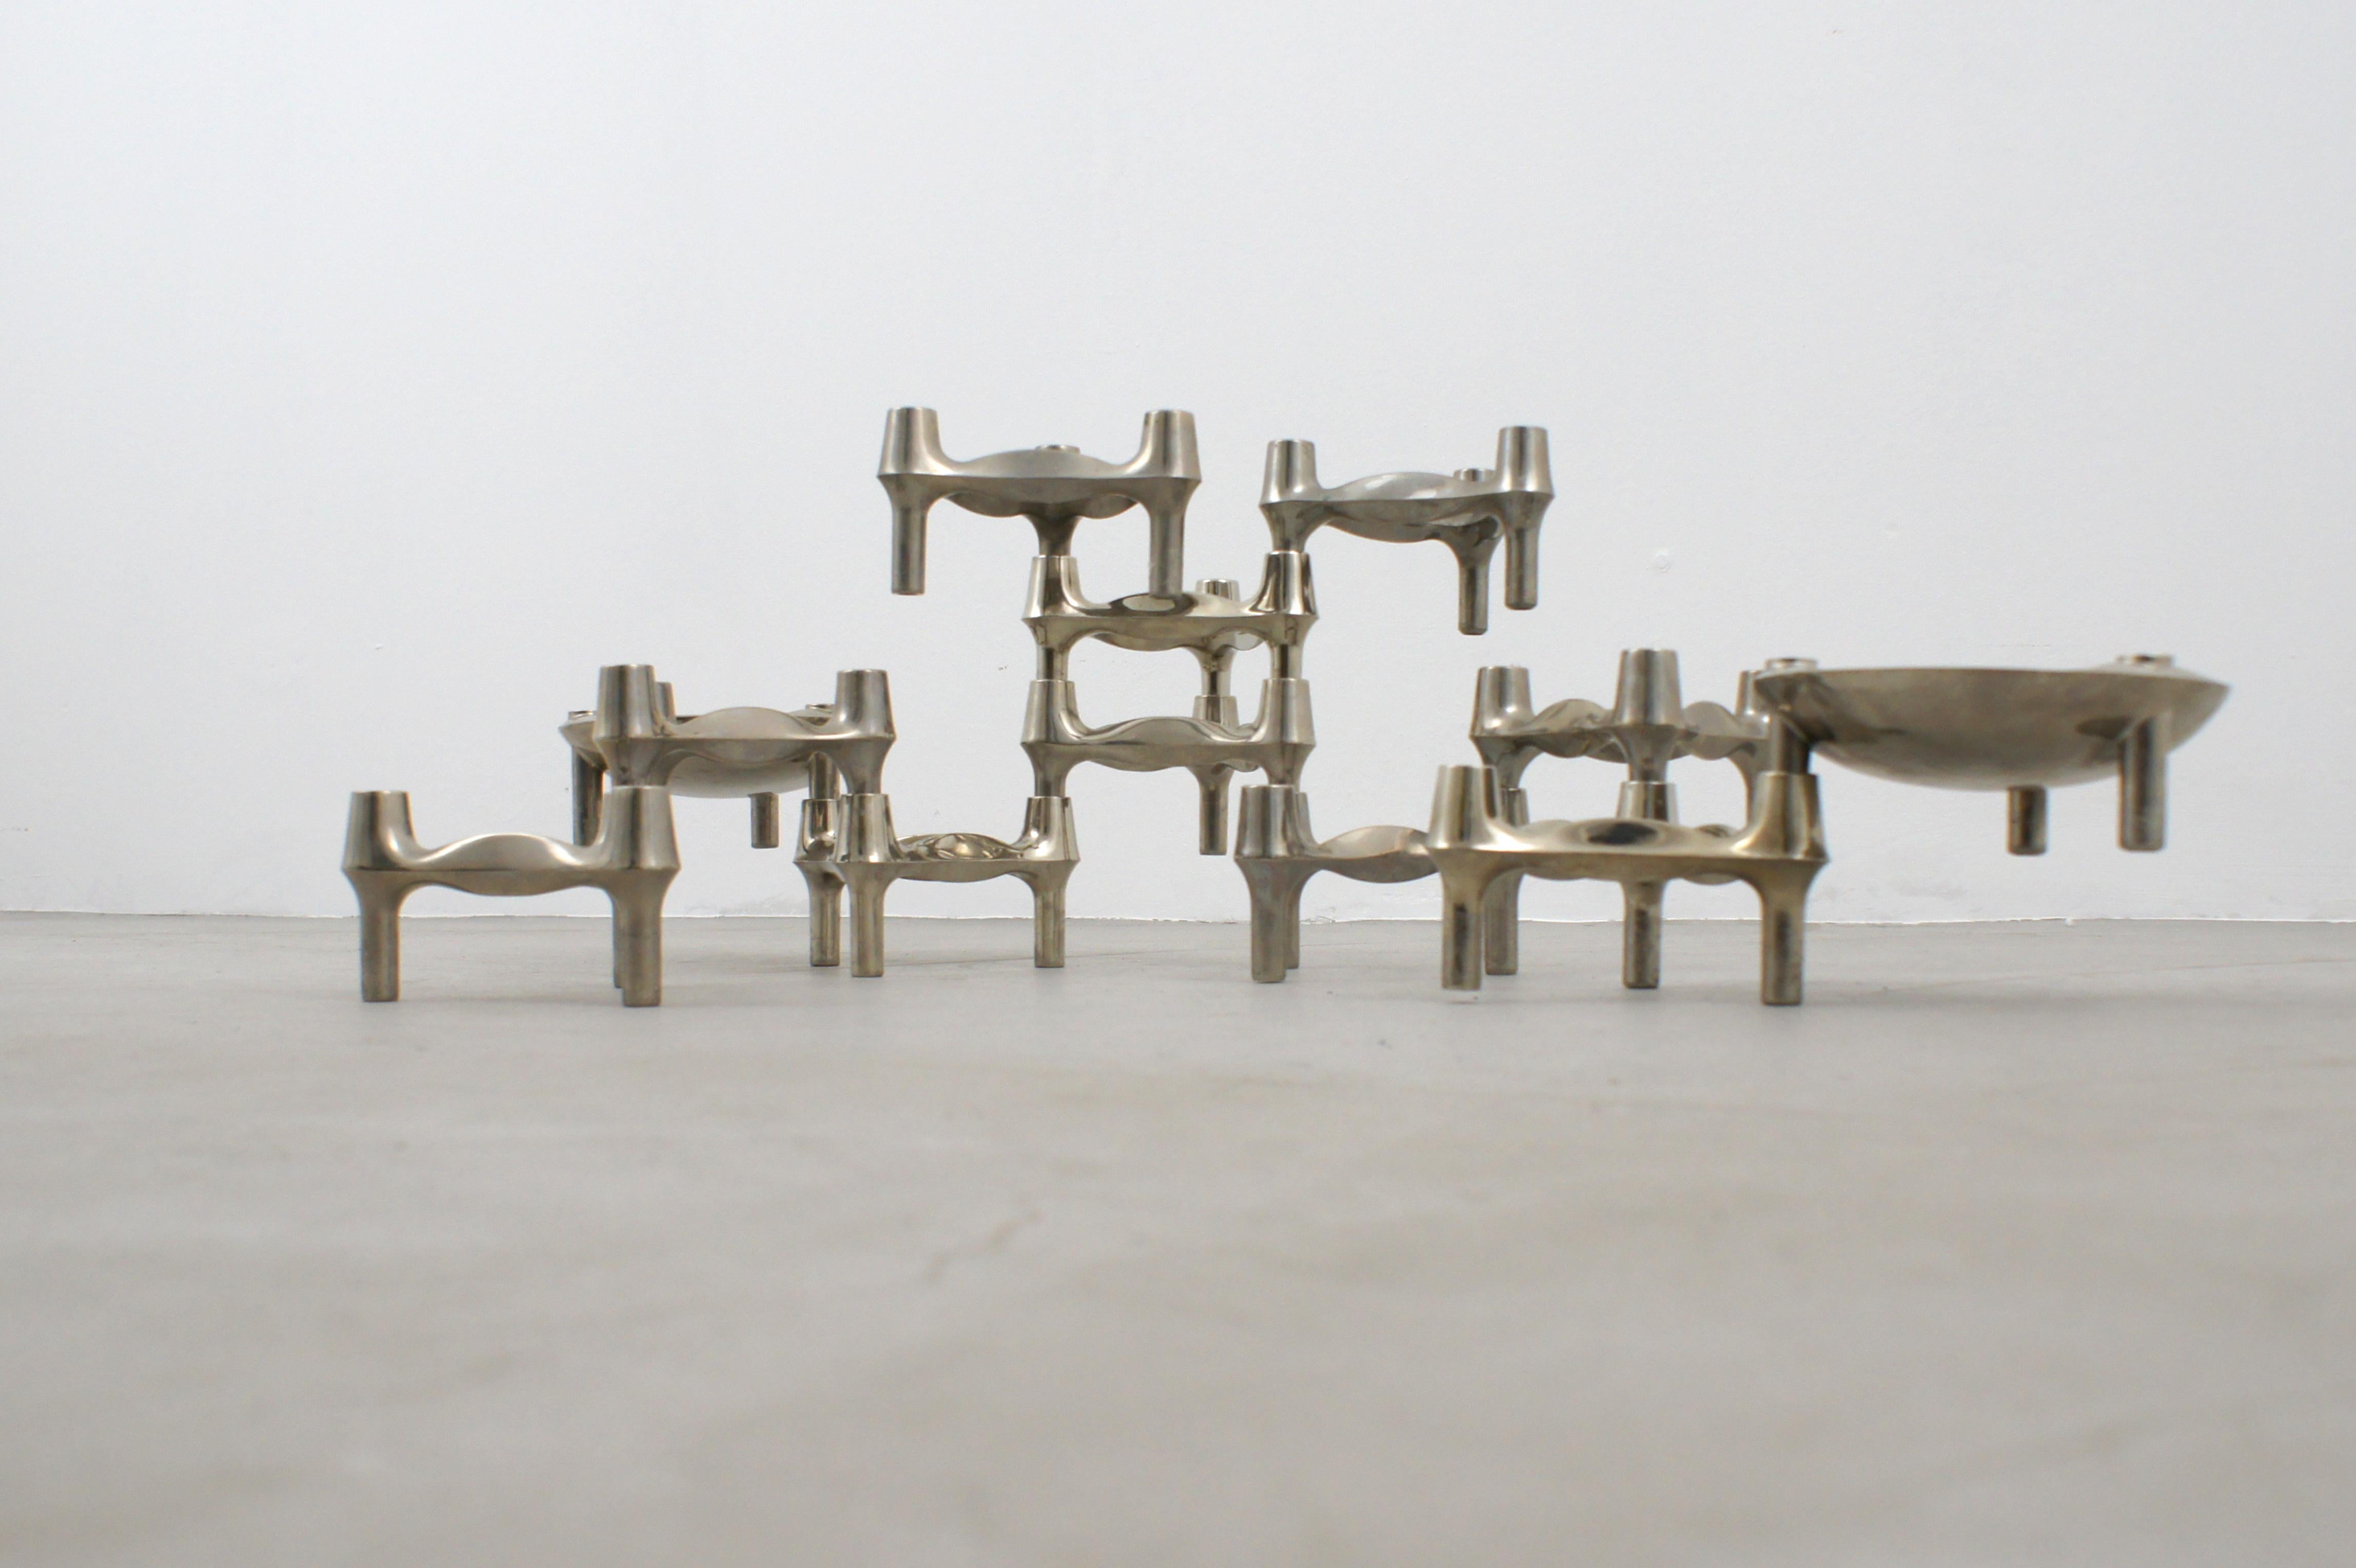 Galvanized metal candle holder set produced by BMF Nagel in the 1960s based on a design by Fritz Nagel. 

Because of their shape, the modules can be assembled into many forms to create an ever-changing sculptural object.

This set consists of 12